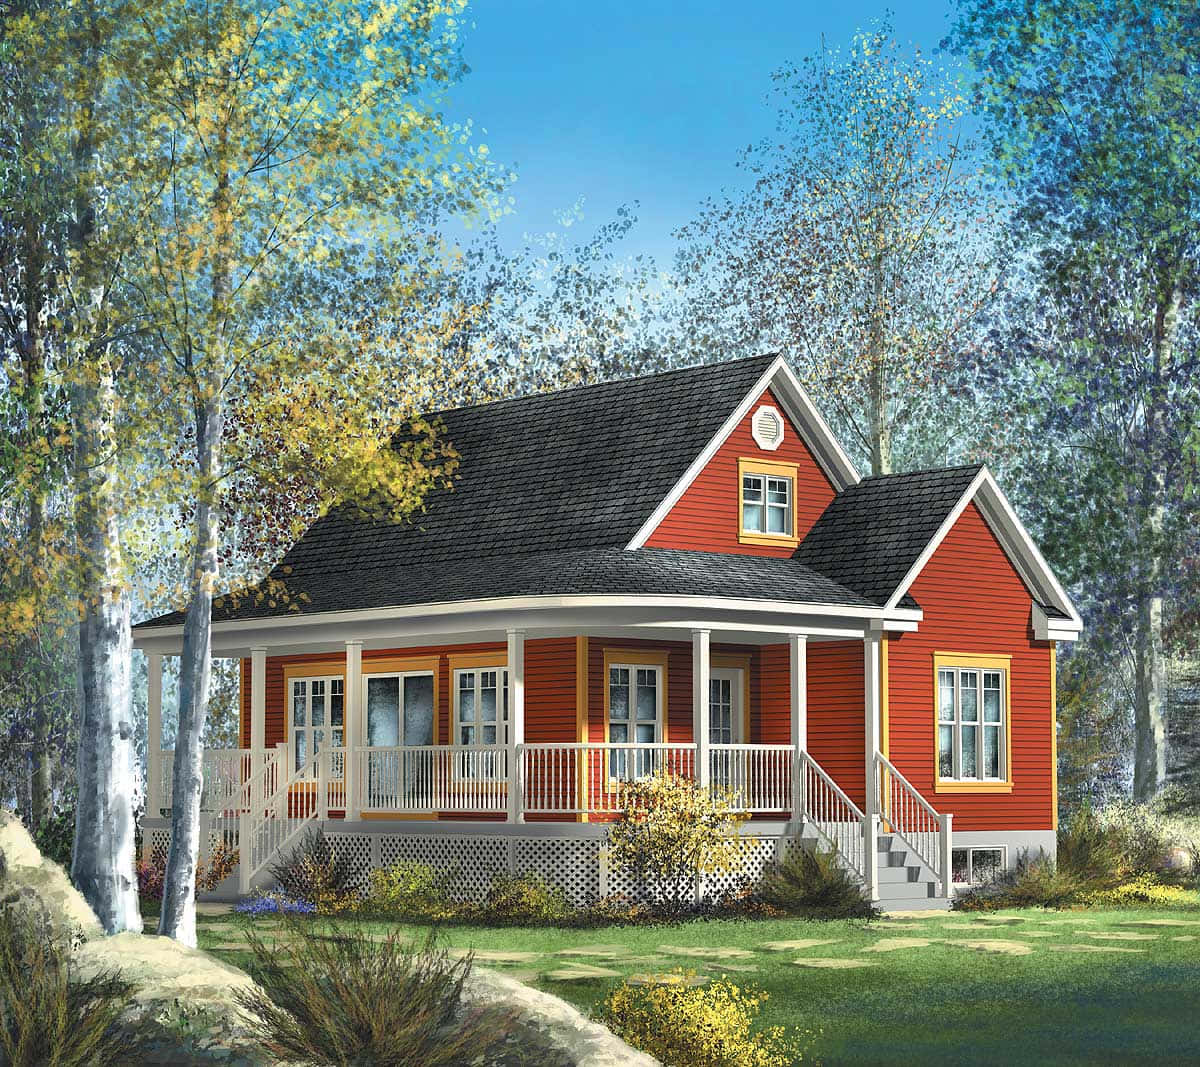 This Is An Rendering Of These Country House Plans